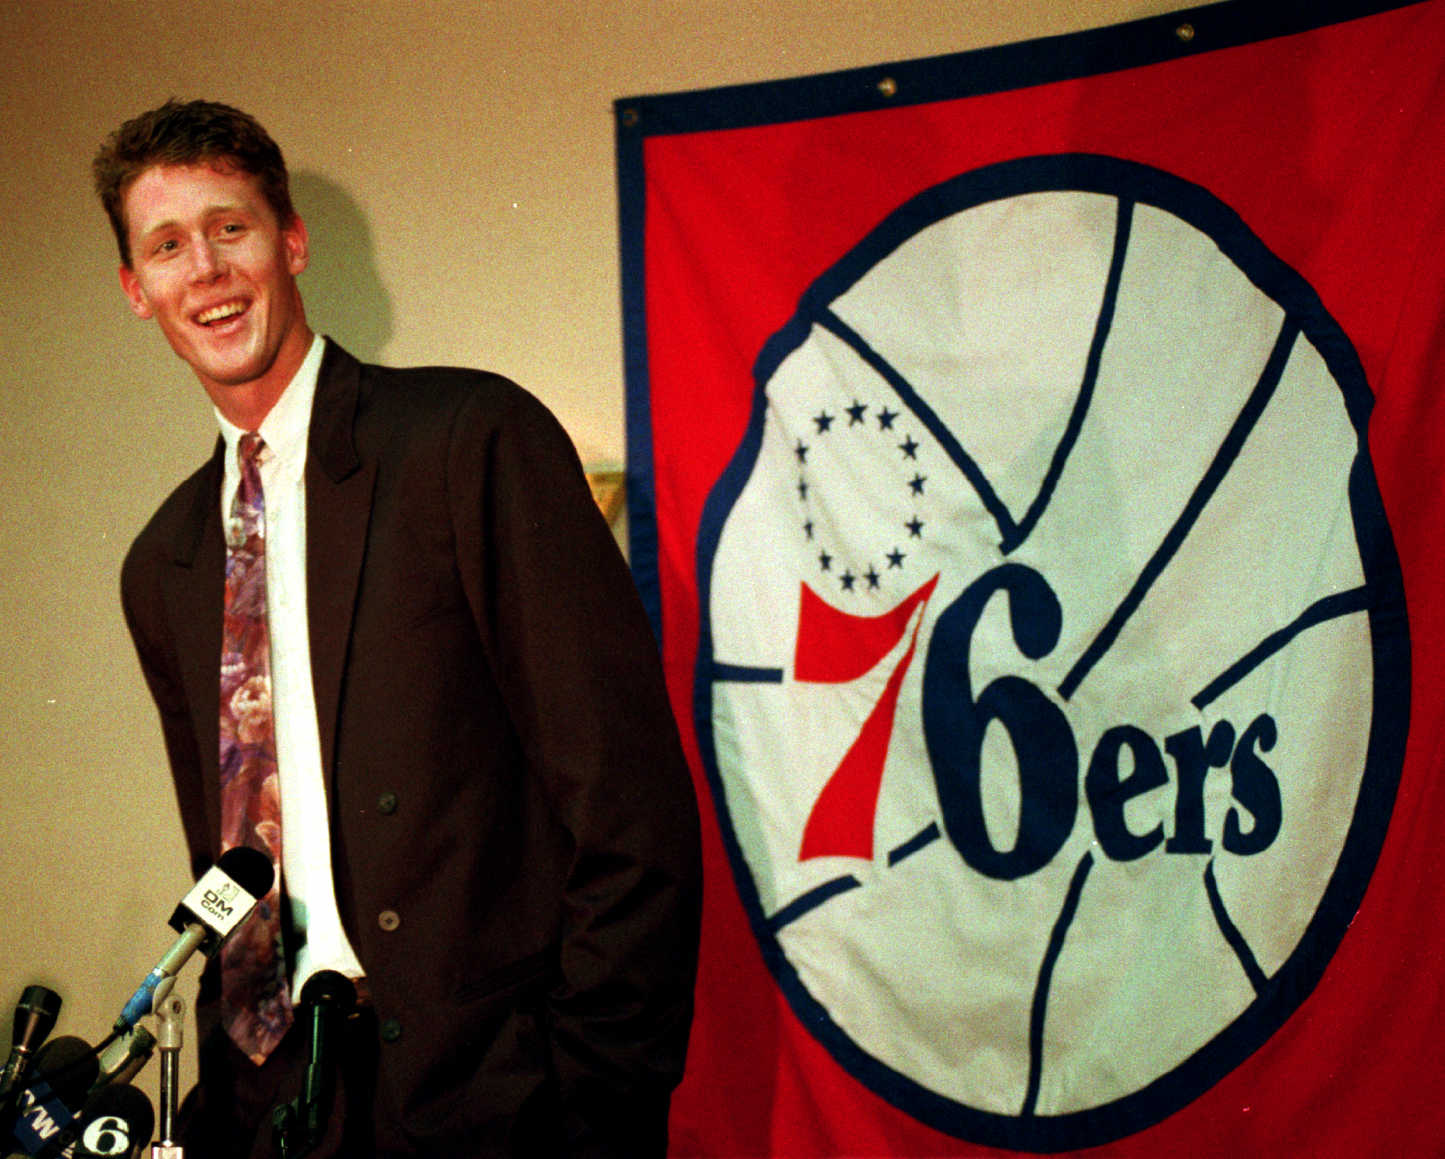 Up Close with Shawn Bradley